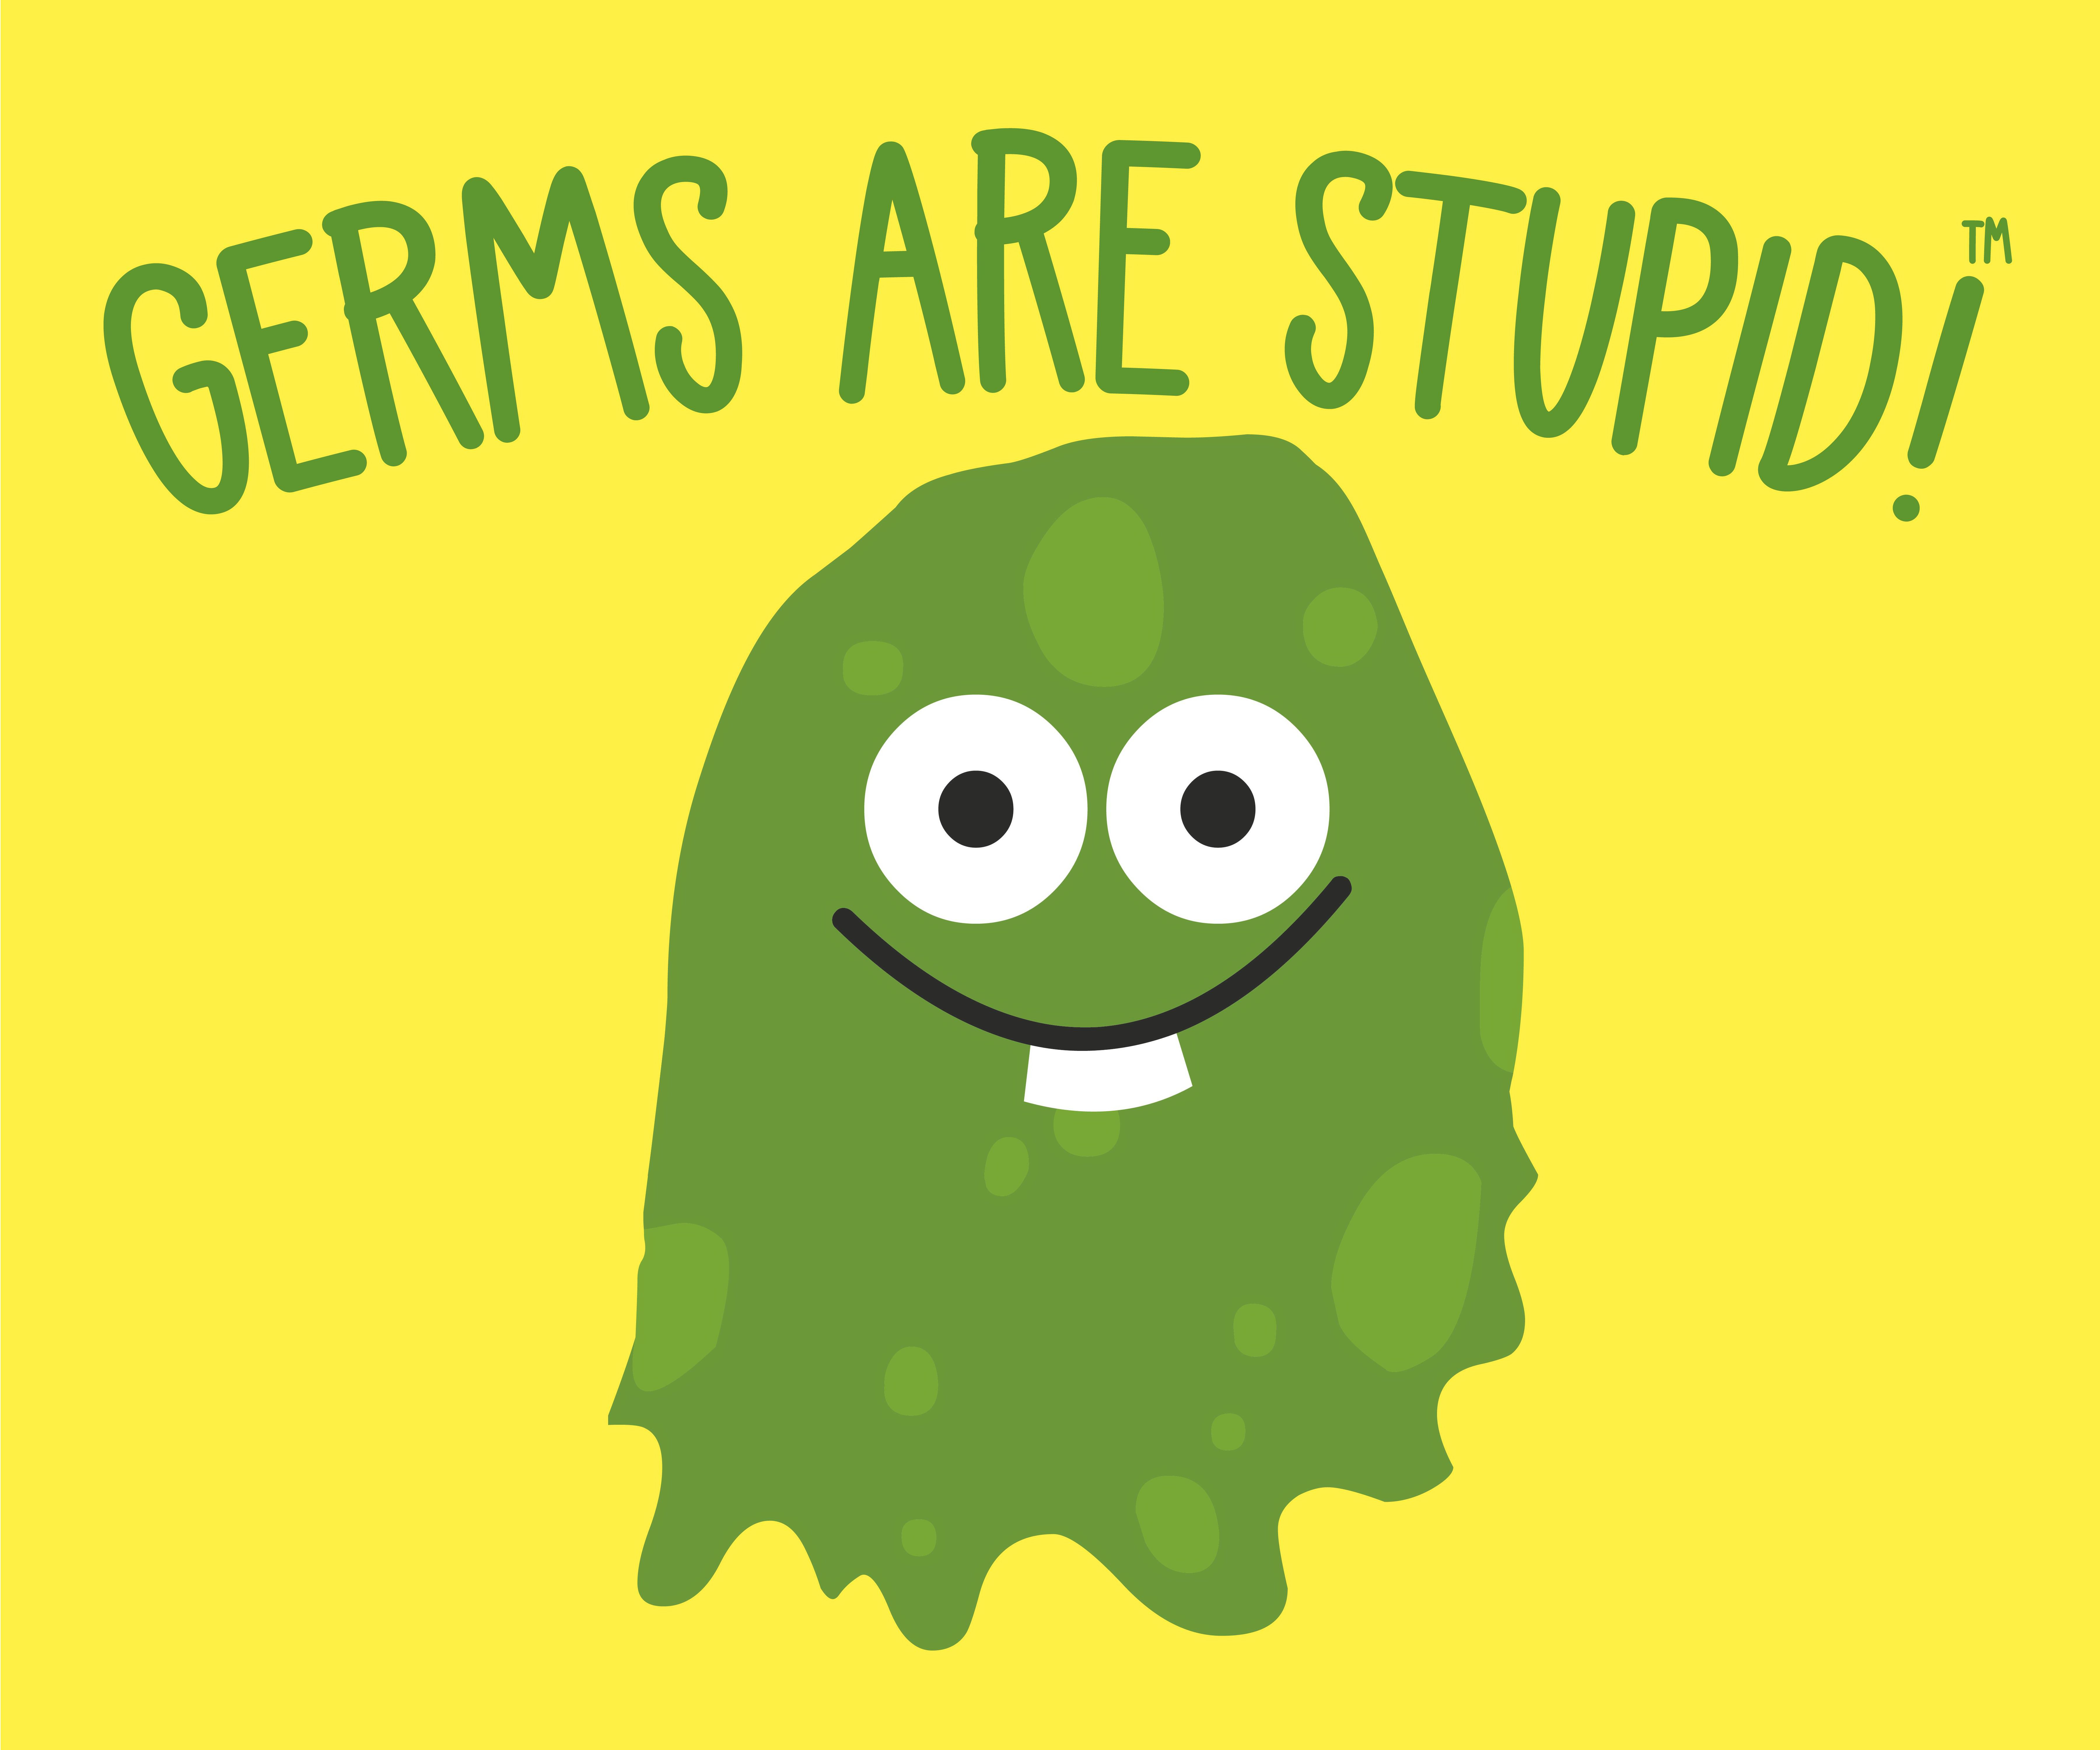 GERMS ARE STUPID